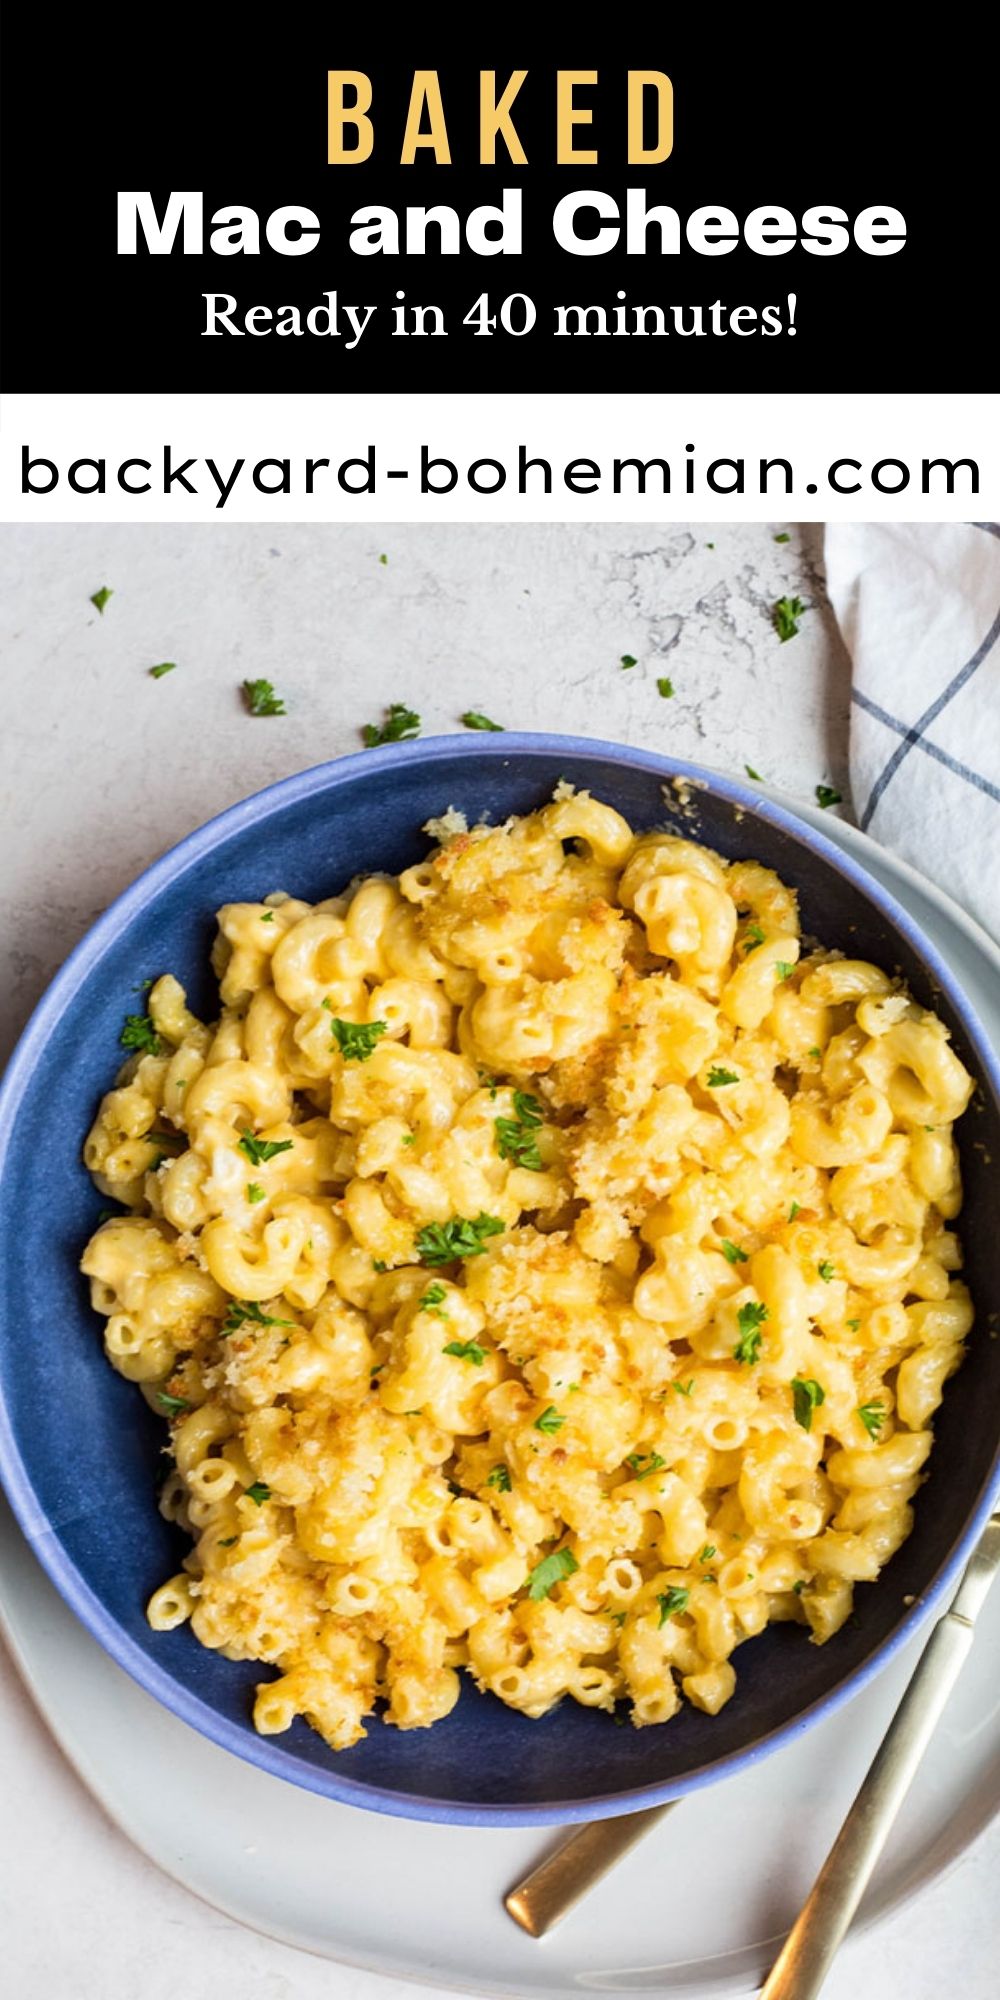 This southern style baked mac and cheese is extra creamy, cheesy, saucy, and ready in under 1 hour! This is true southern comfort food that is hearty, wholesome, and filling!